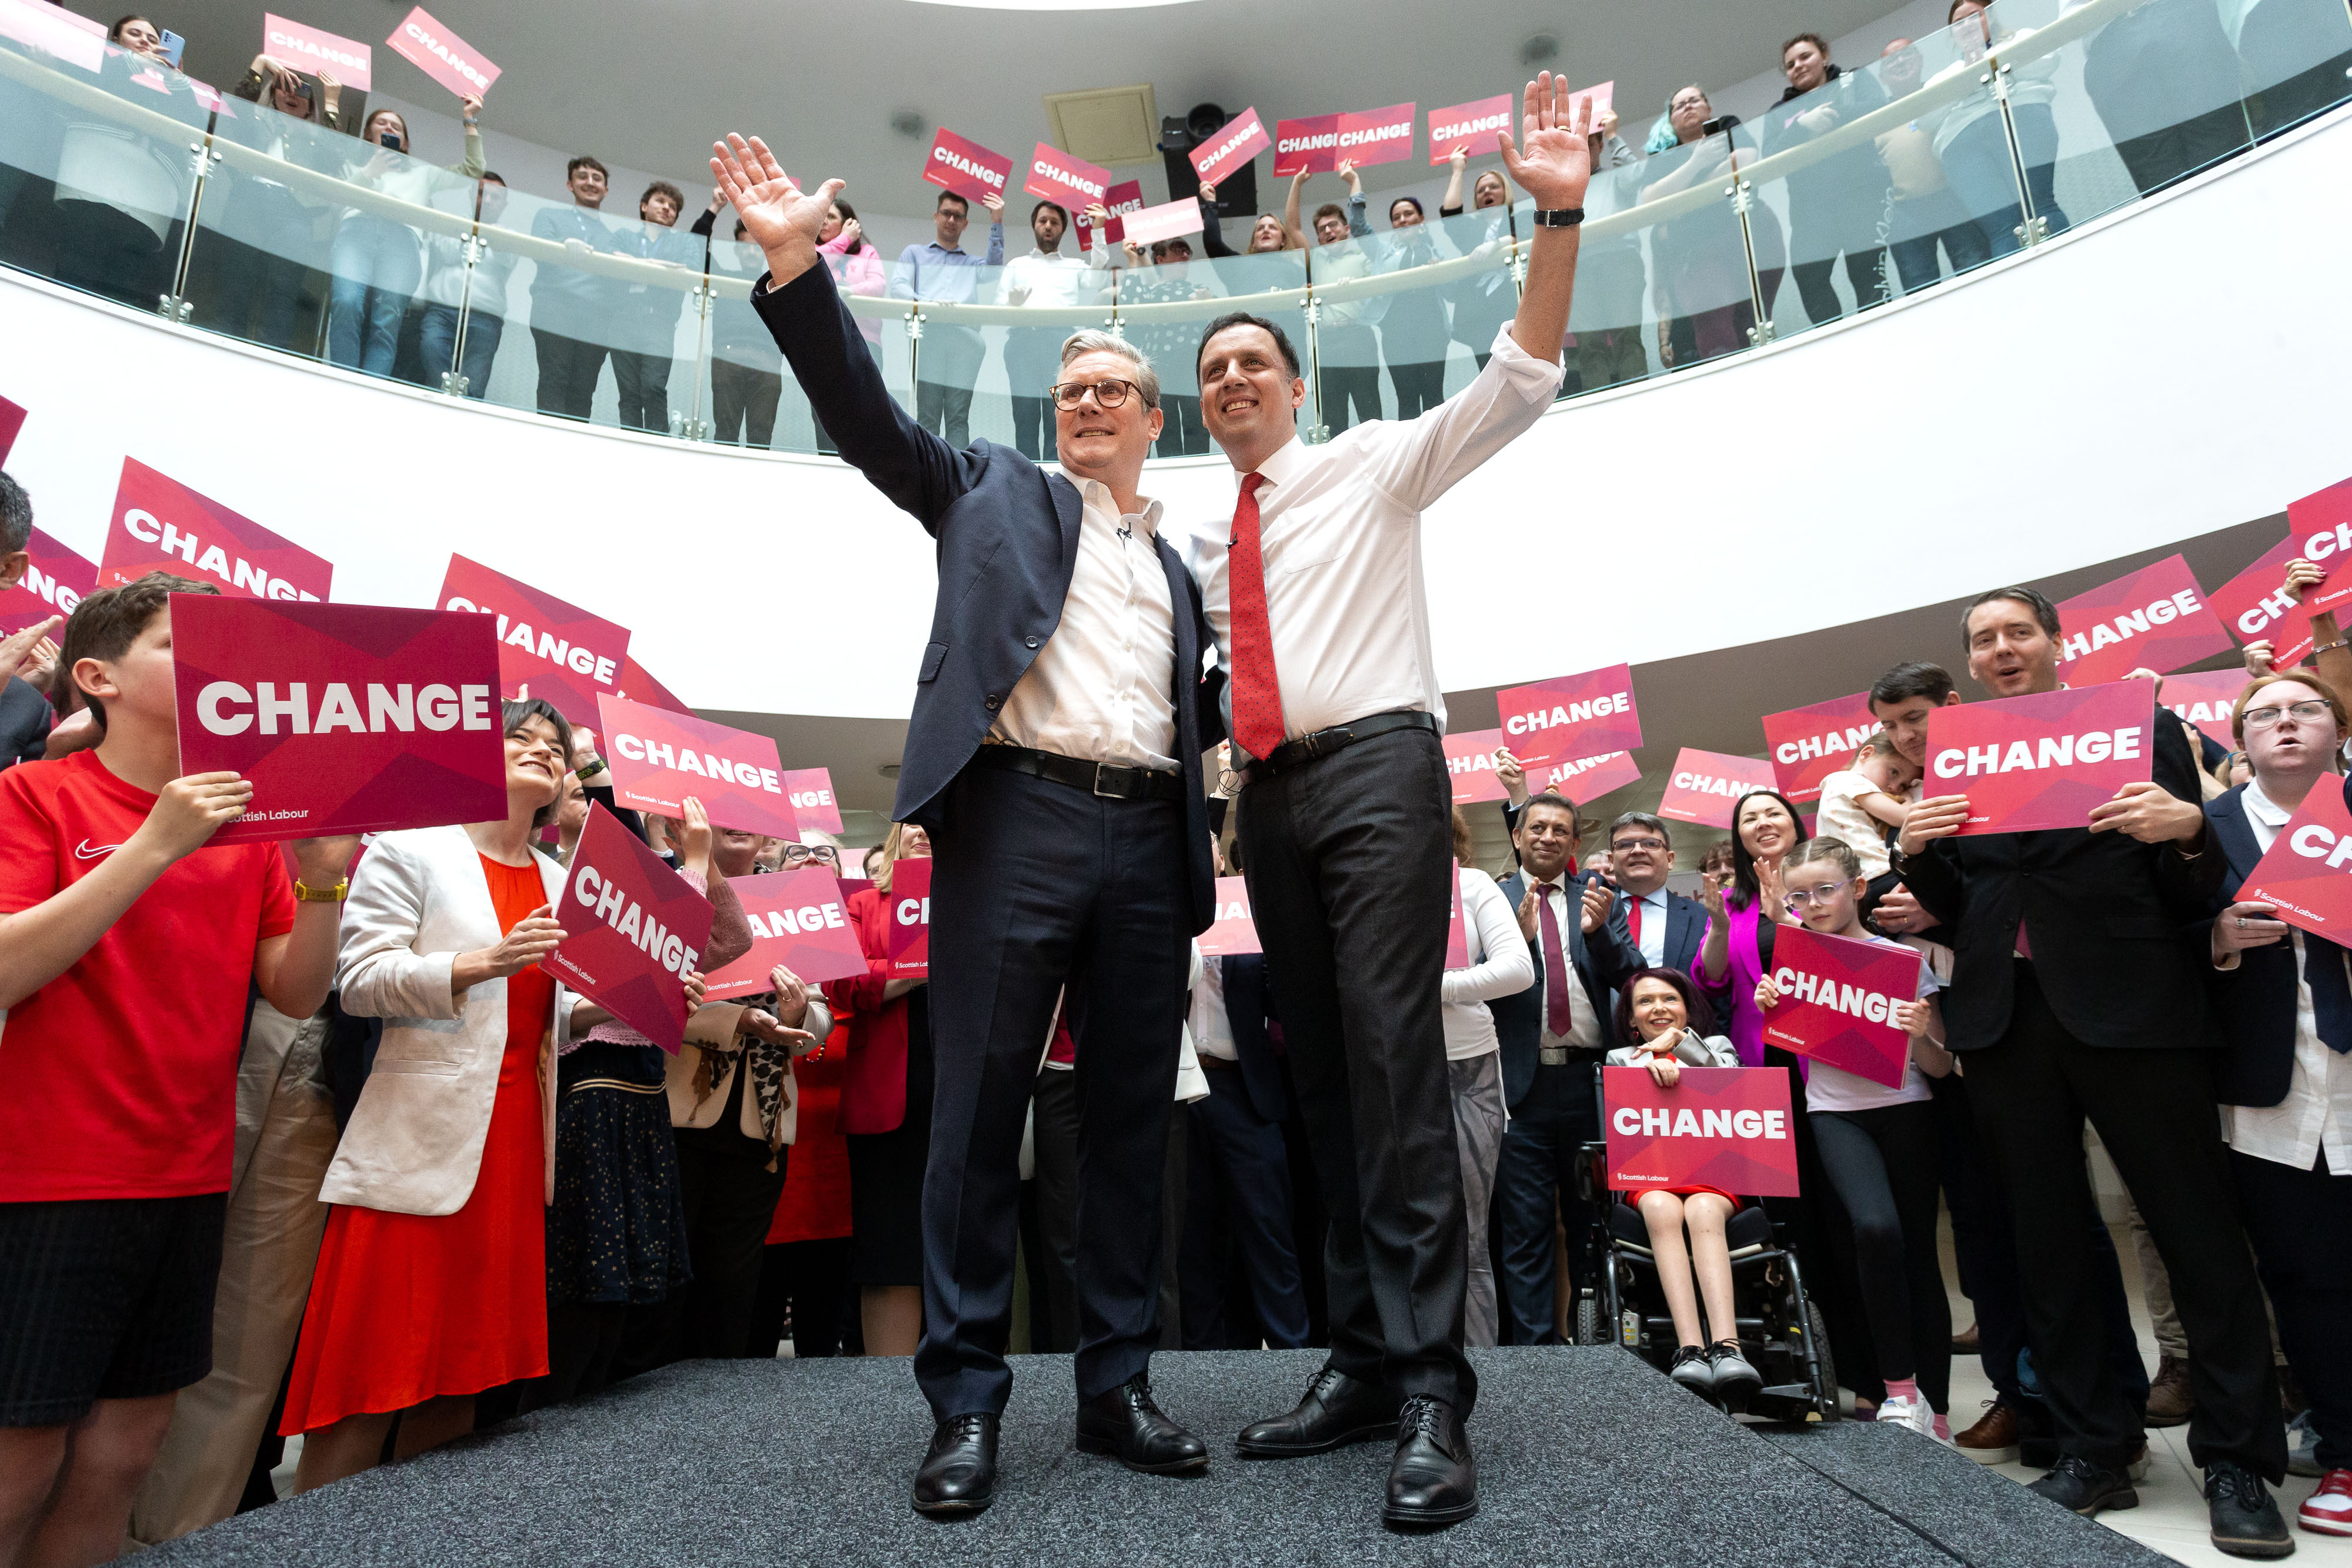 Sir Keir Starmer, left, had a favourability rating of plus 3 under the polling by Survation. Anas Sarwar, right, the Scottish Labour leader, trailed behind him on minus 3